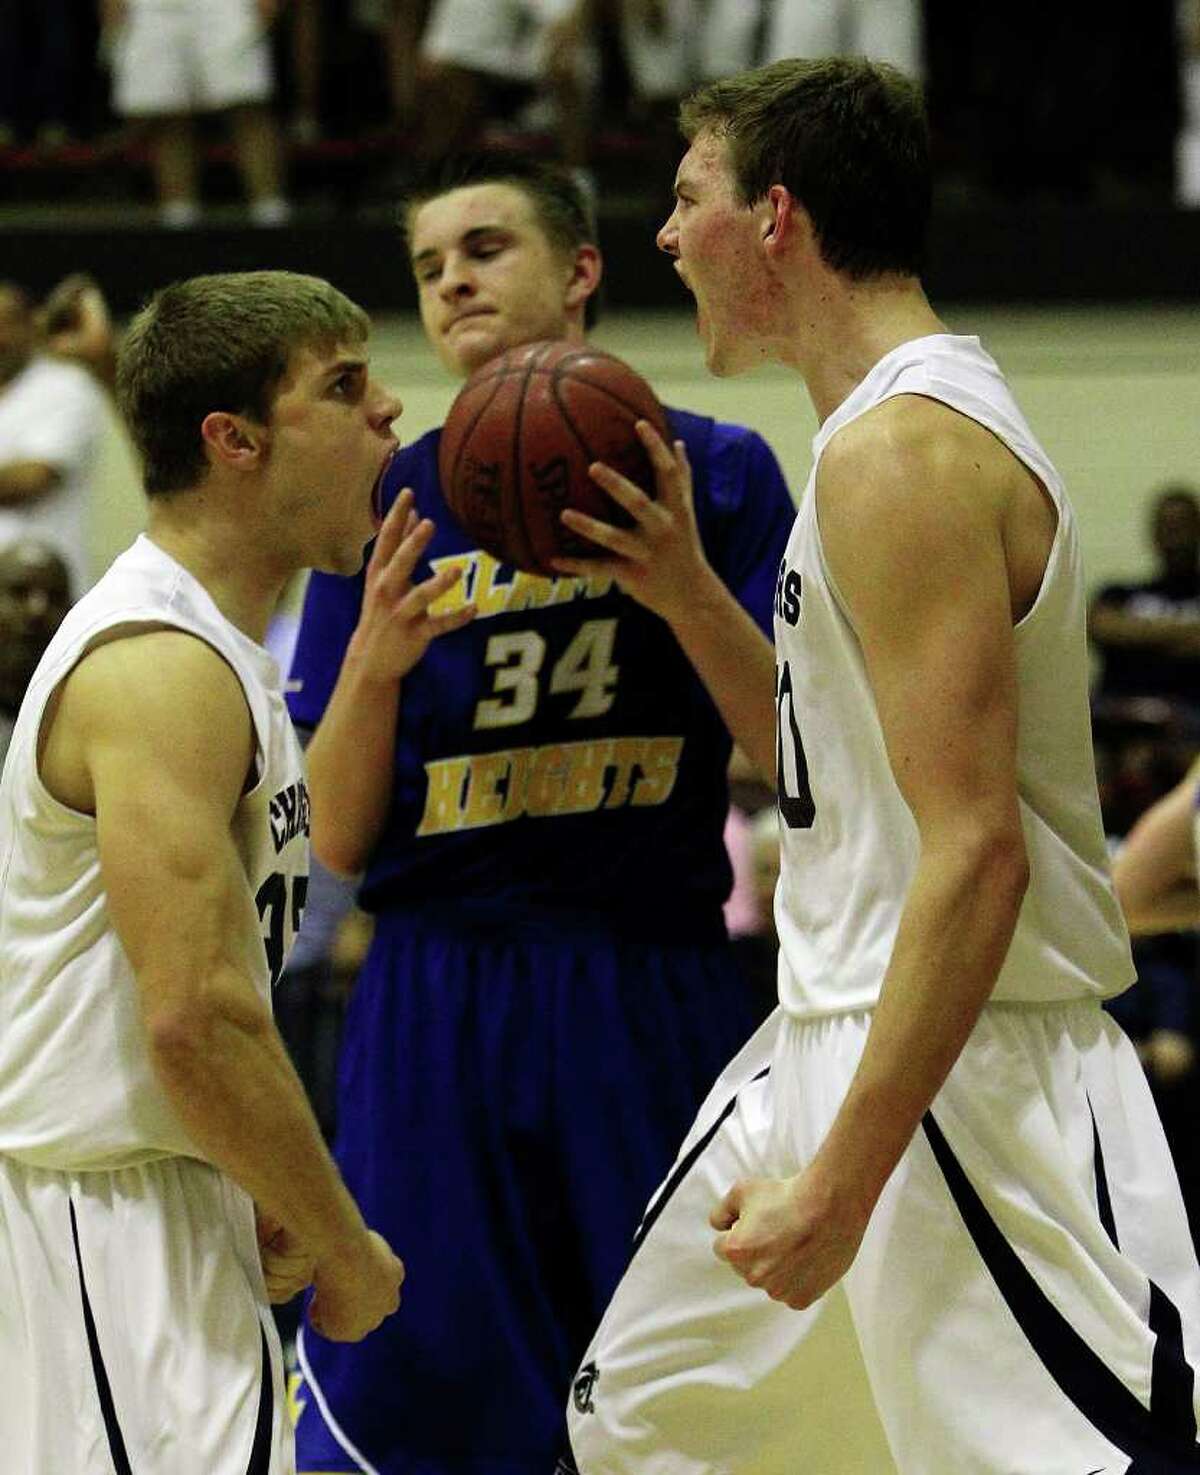 Alamo Heights' Shelby Lane (34) can only look away as Boerne Champion's David Rogers (left) reacts with teammate Dallas Quick (right) after Quick managed a put back against Alamo Heights for a score in Class 4A basketball playoffs at Littleton Gym on Wednesday, Mar. 2, 1011. Boerne Champion defeated Alamo Heights, 53-47. Kin Man Hui/kmhui@express-news.net